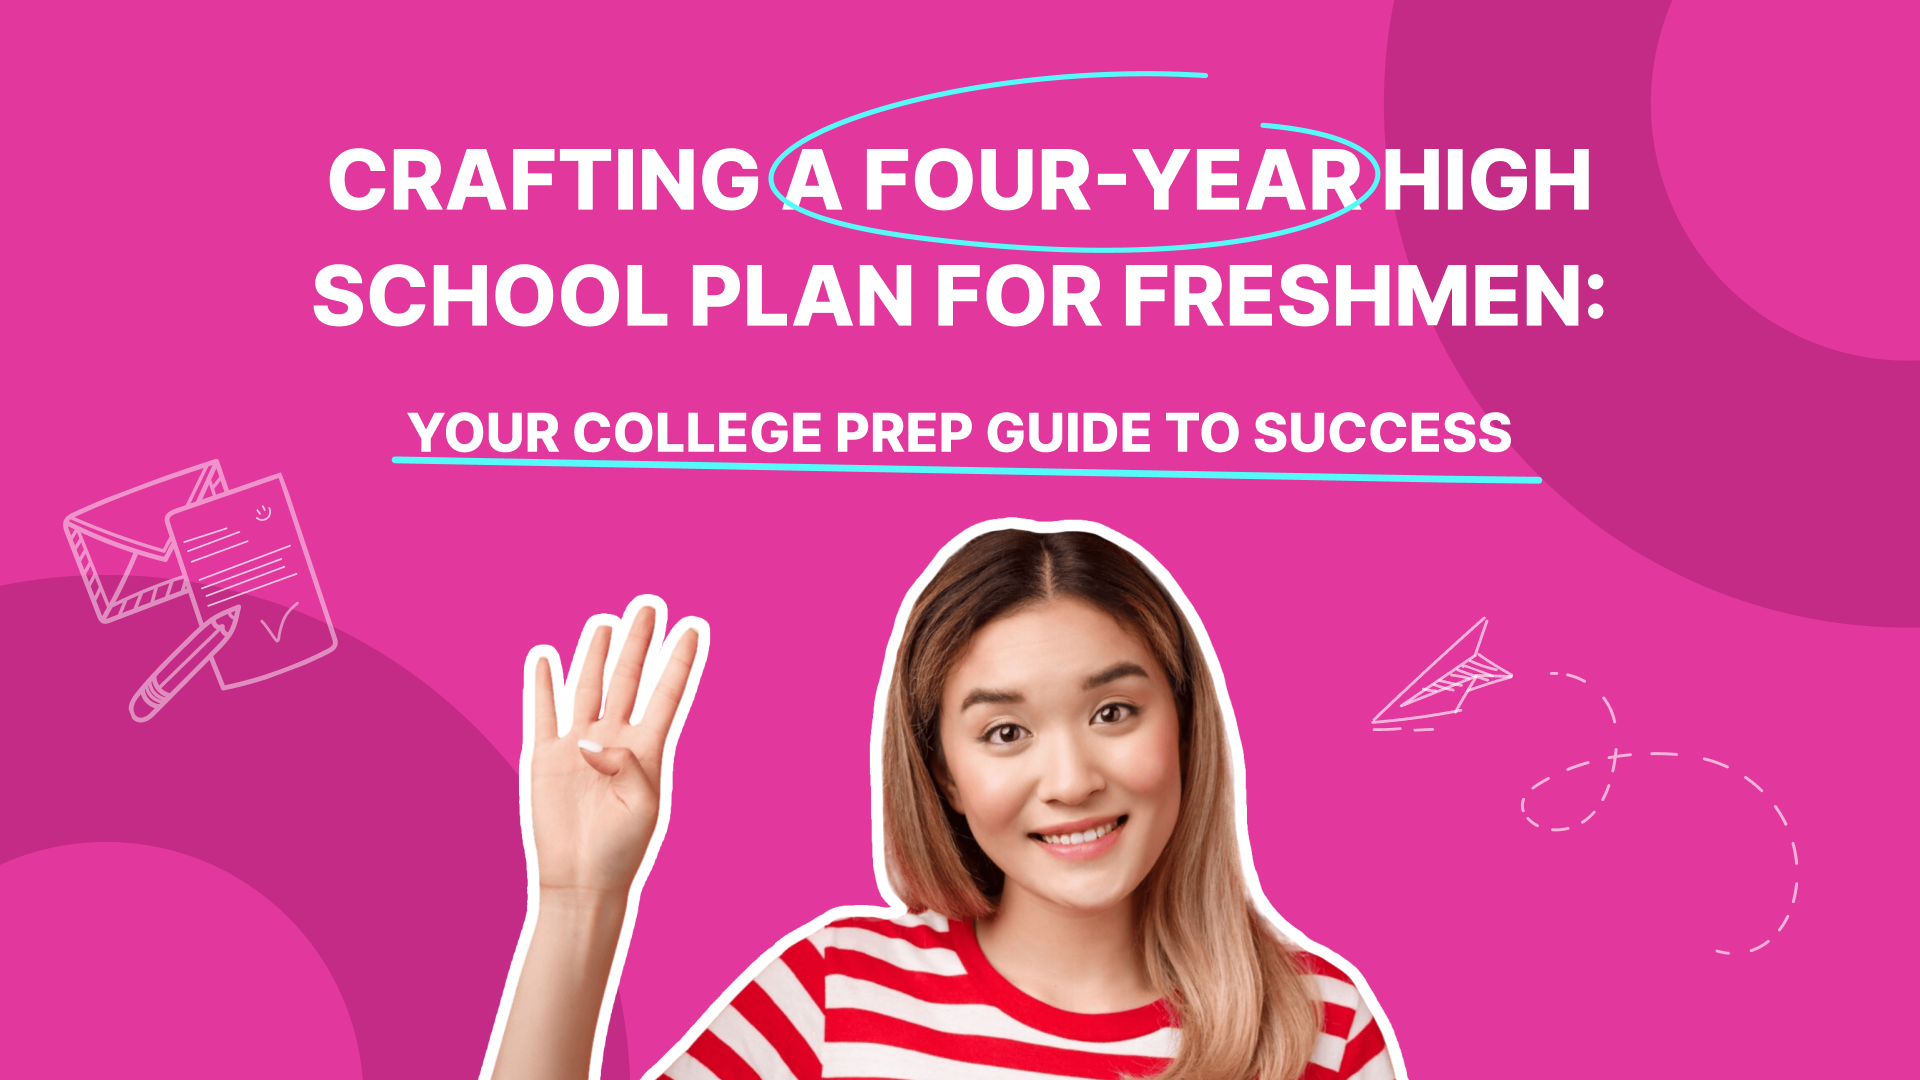 Crafting a Four-Year High School Plan for Freshmen: Your College Prep Guide to Success